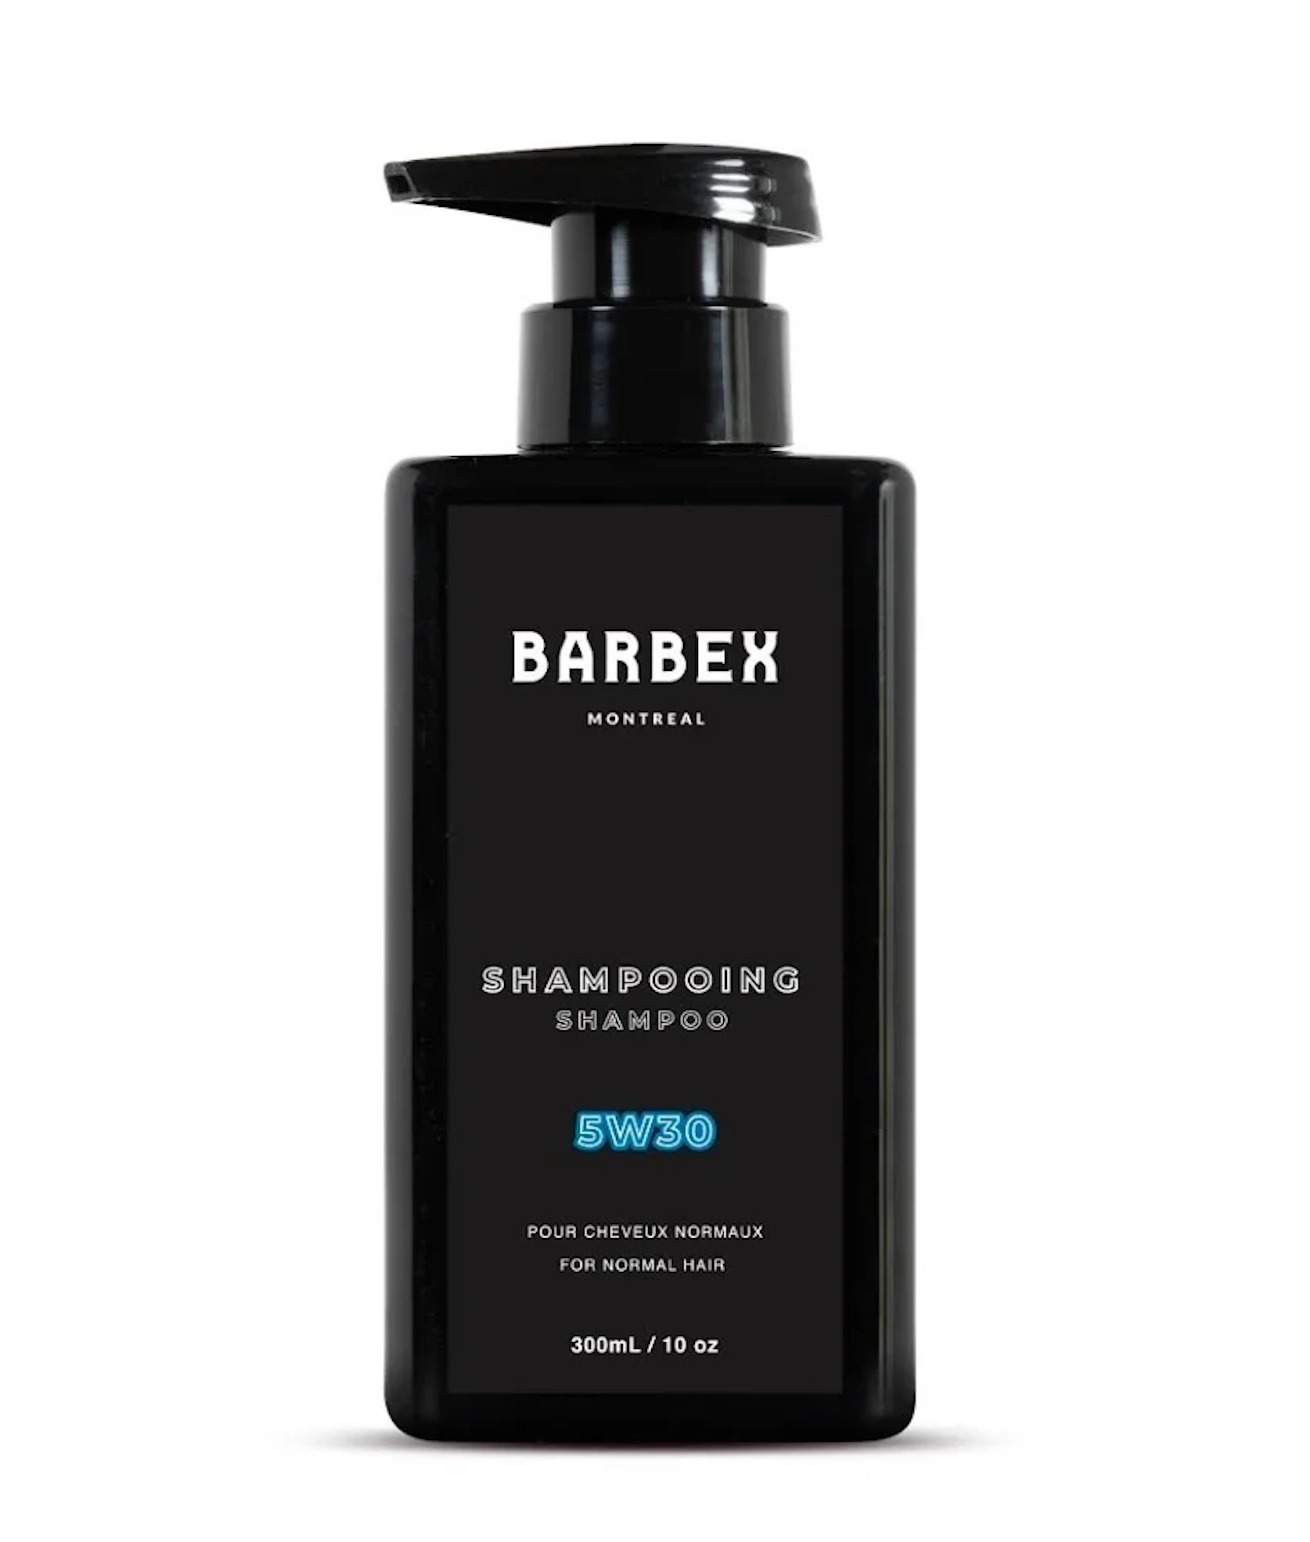 Shampoing pour homme 5W30 - 300 ml